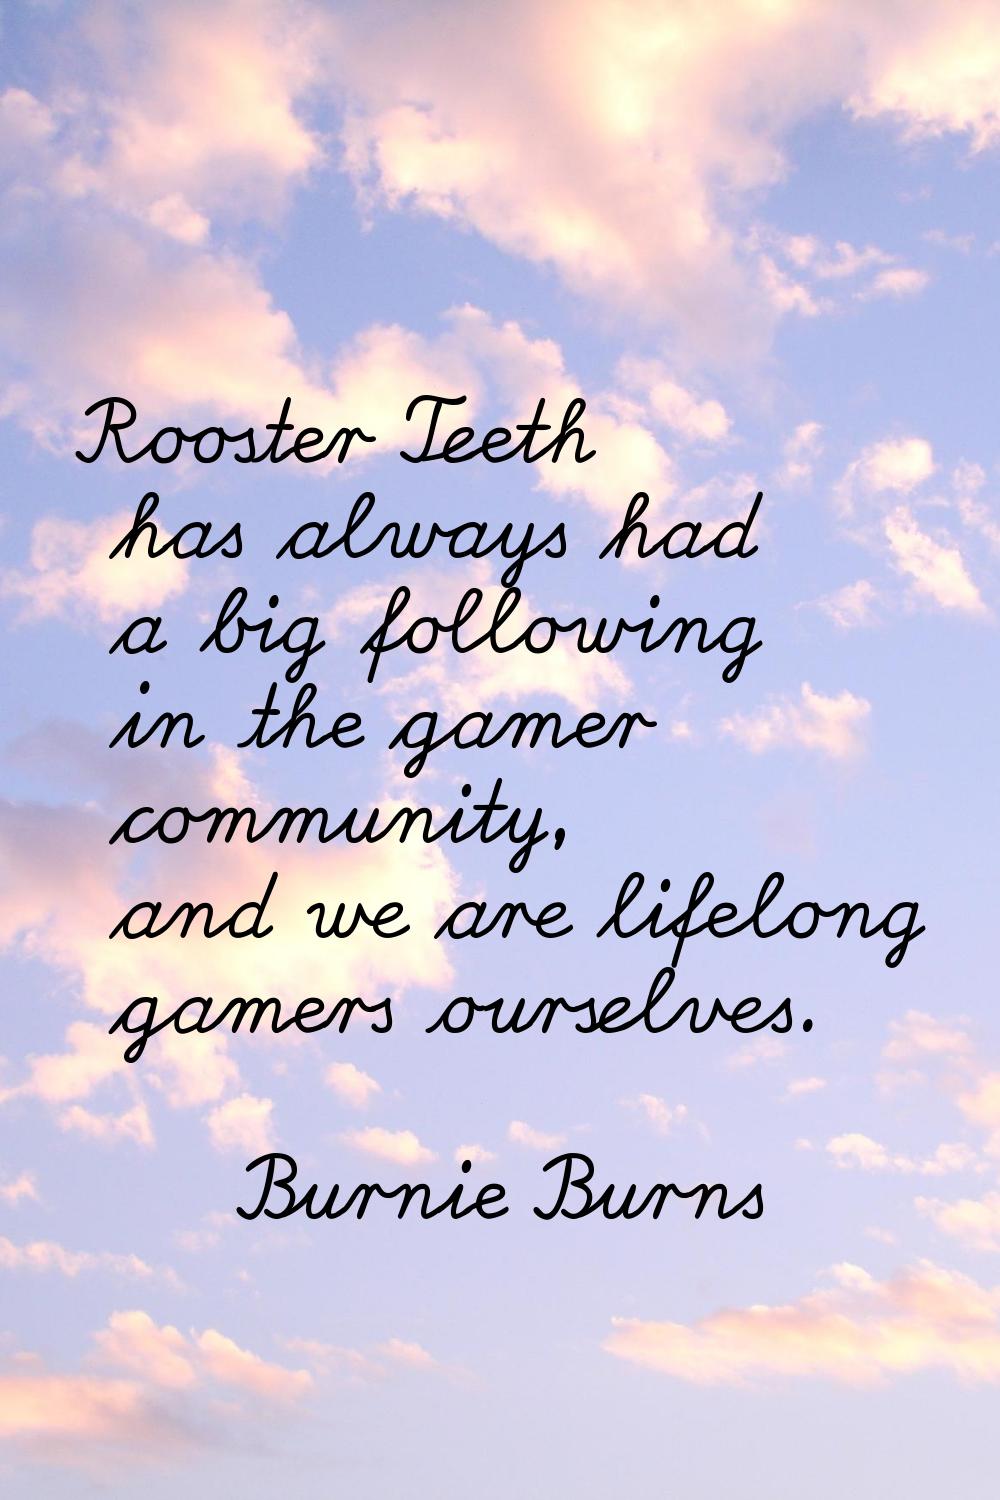 Rooster Teeth has always had a big following in the gamer community, and we are lifelong gamers our